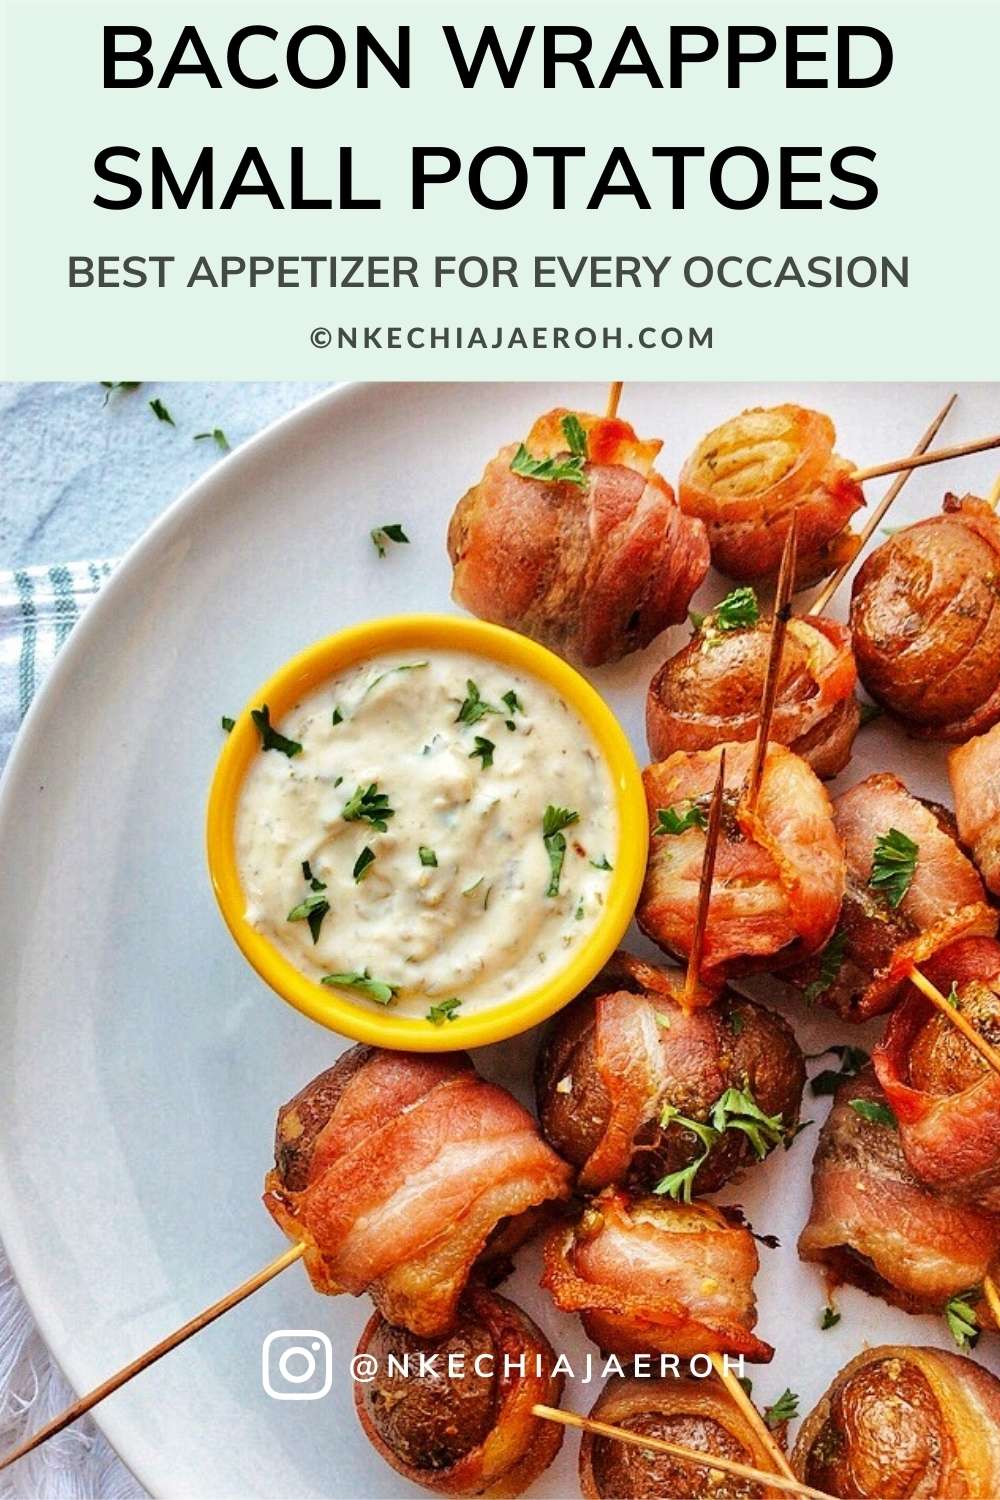 Small potatoes marinated in coconut cream parsley pesto wrapped in bacon and baked to perfection is literal heaven. These bacon wrapped small potatoes are tasty, flavorful, tender and soft inside, perfectly toasted, and crisp outside. Whether you are looking for your family’s next best appetizer, or you are looking for that perfect dish to bring to the next potluck, these babies fit just right because they would please everyone! #Potatoes #Bacon #Baconwrappedpotatoes #appetizers #smallpotatoes 